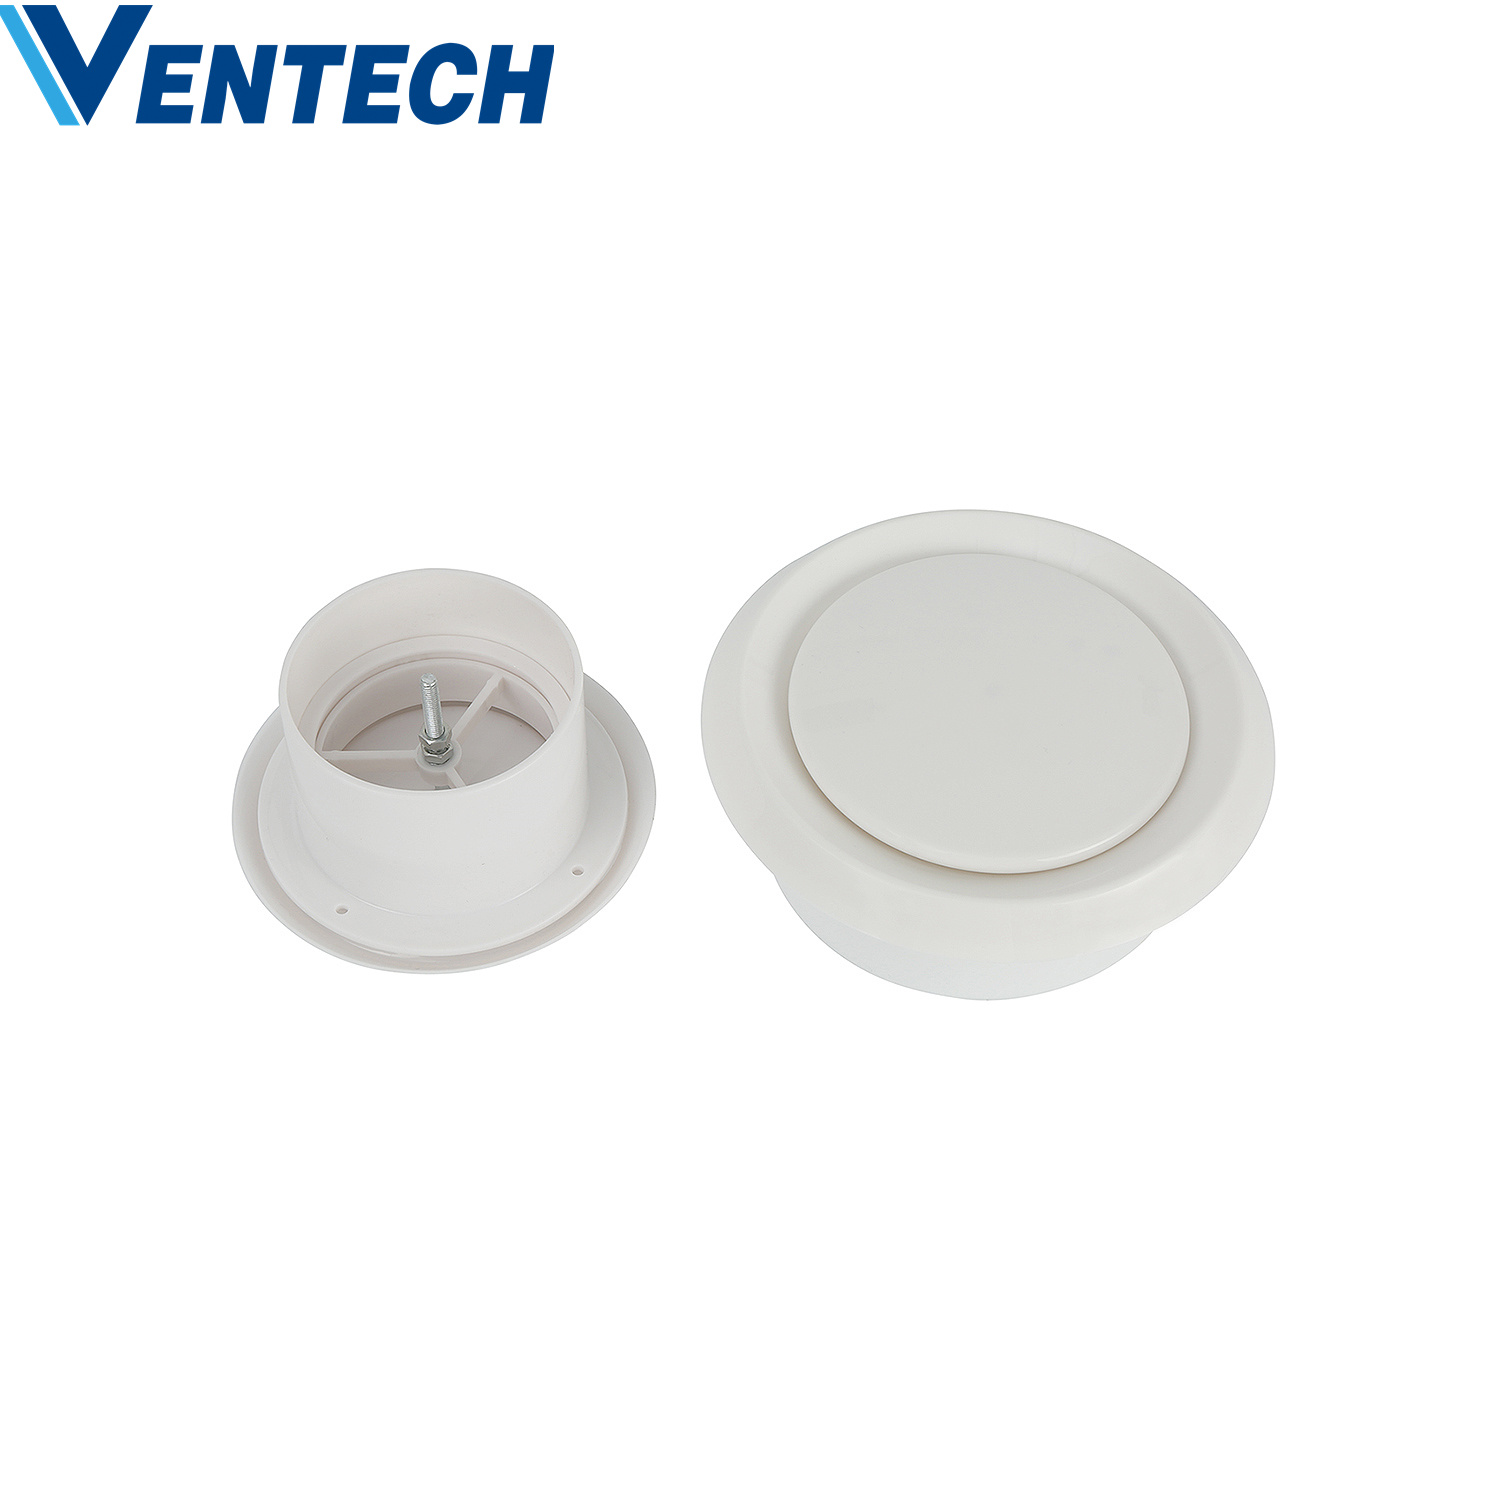 ABS Plastic Ceiling Round Diffuser with Flange 5" Air Disc Valve 